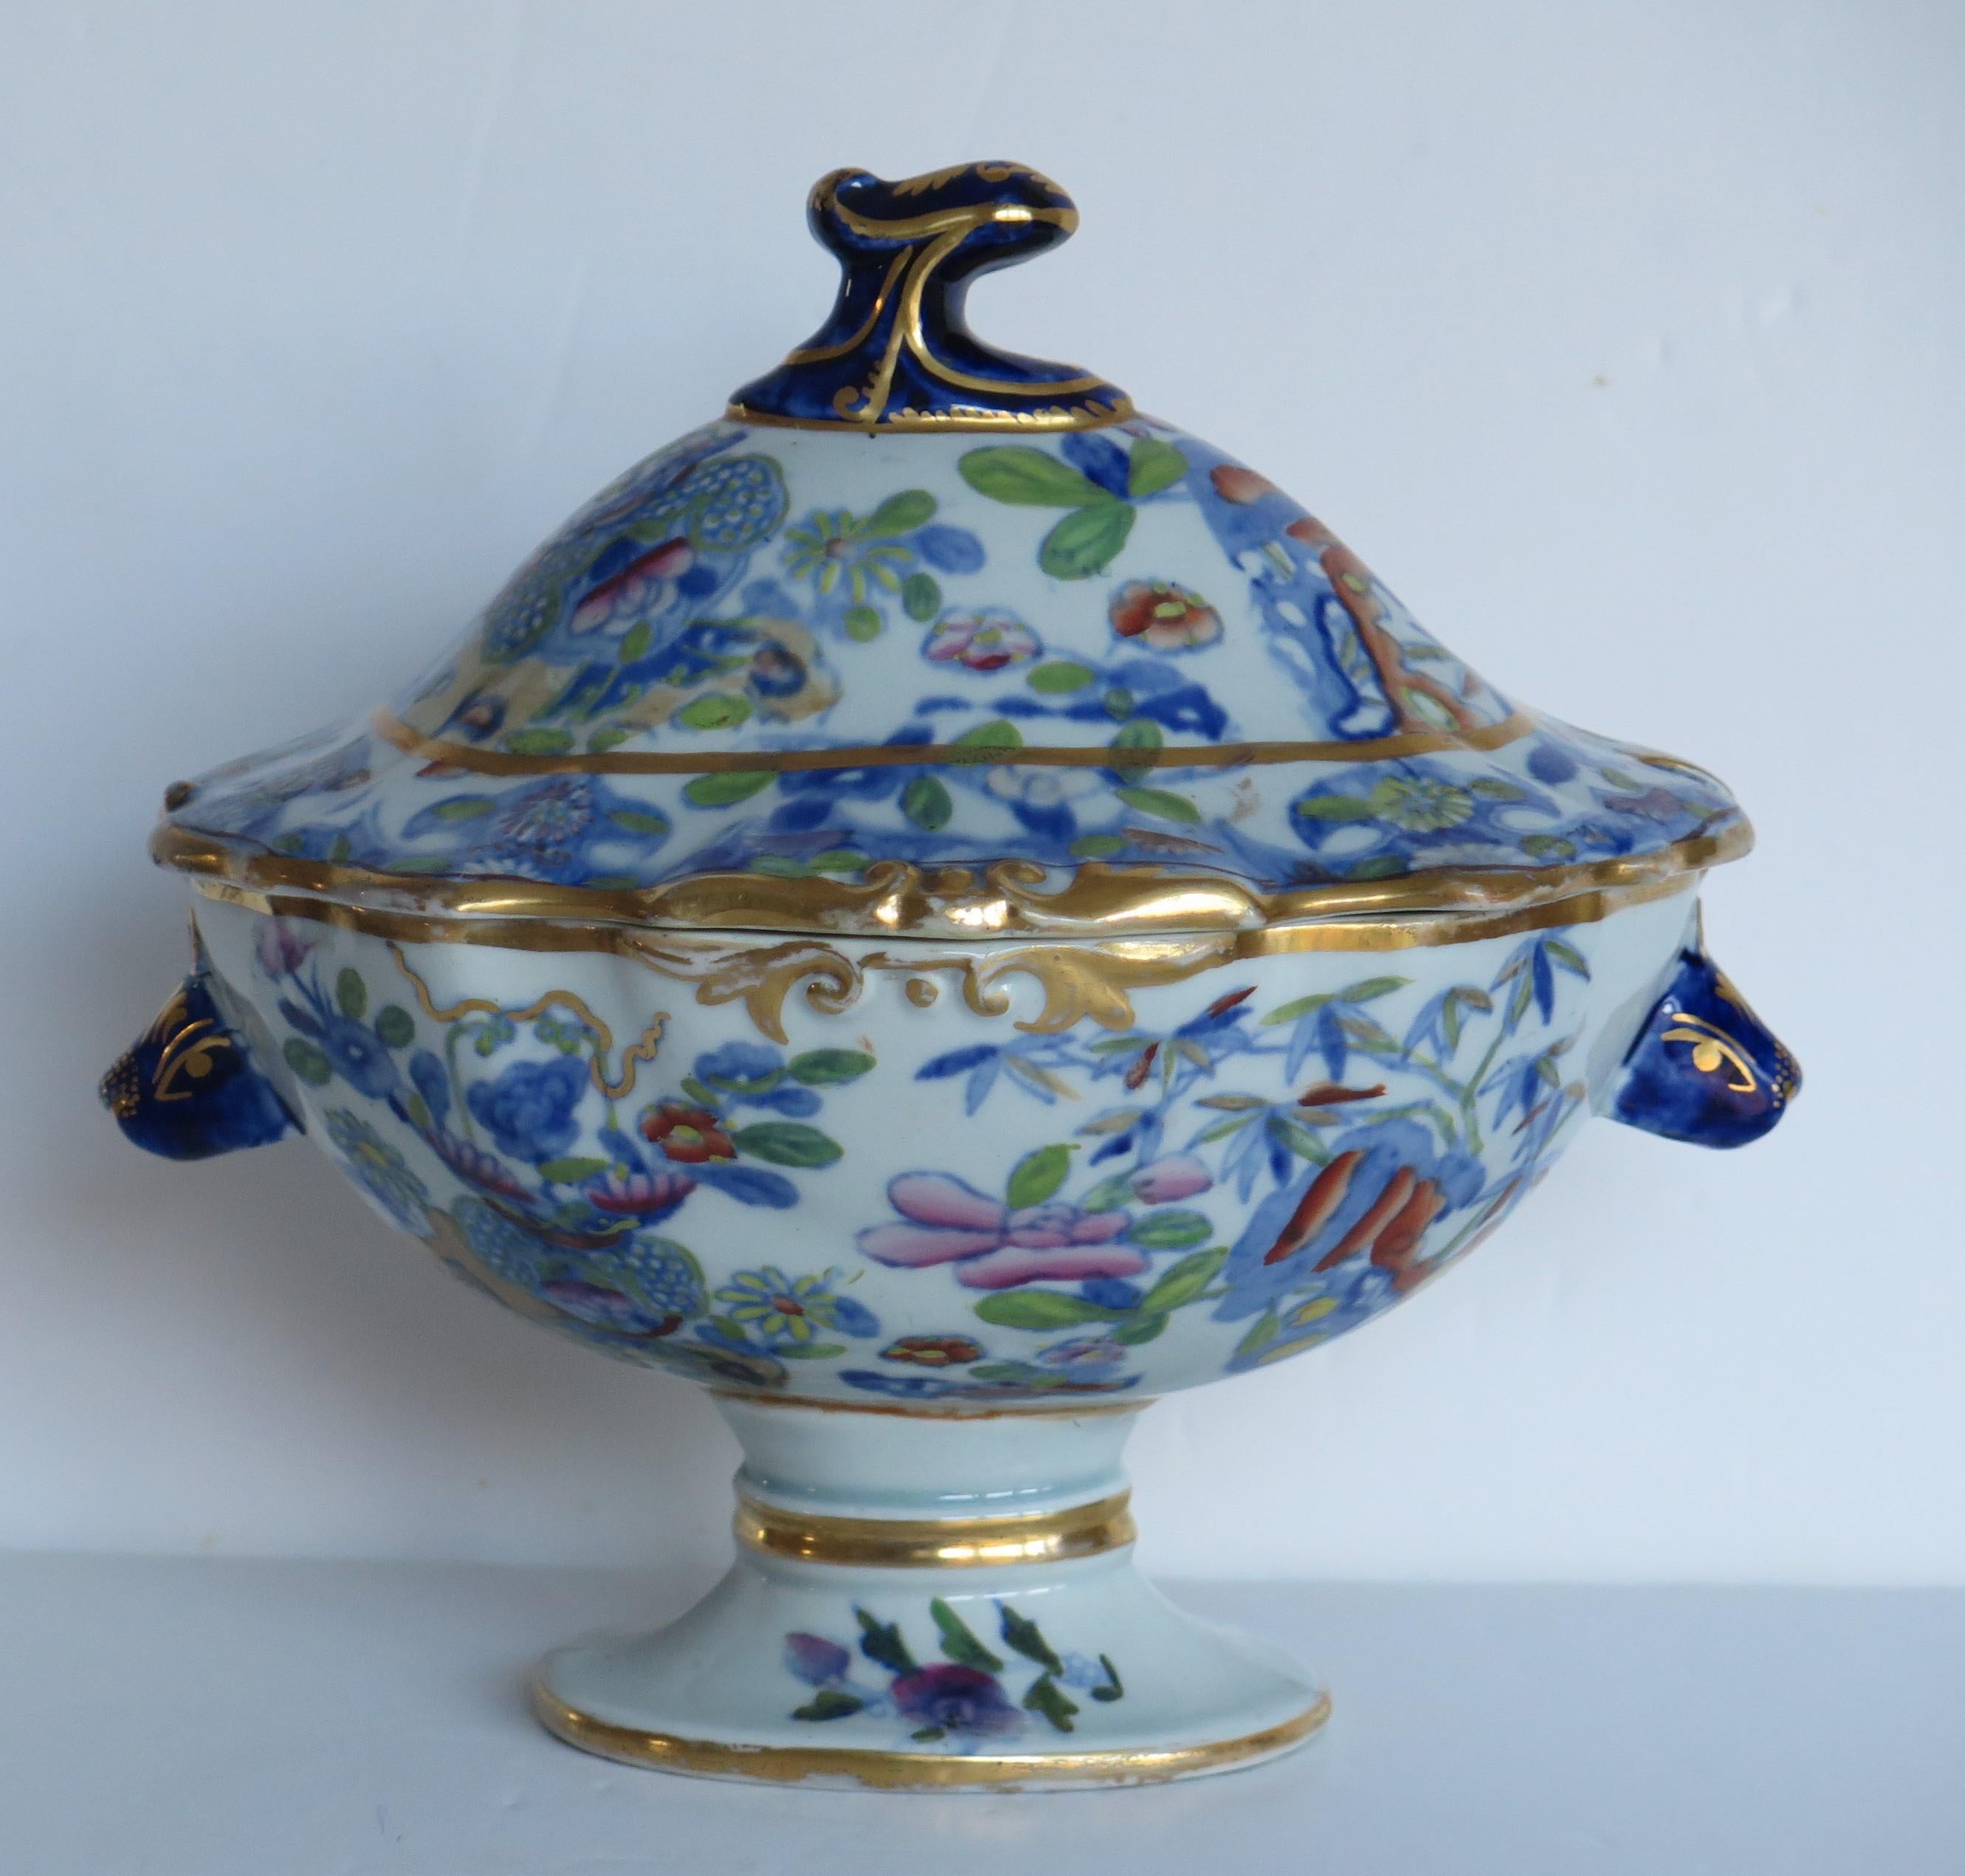 This is a superb Ironstone Sauce Tureen, complete with lid, made by Mason's of Lane Delph, Staffordshire, England, during the early part of the 19th century, circa 1820.

This tureen and its lid are well potted in a beautiful and elegant pedestal